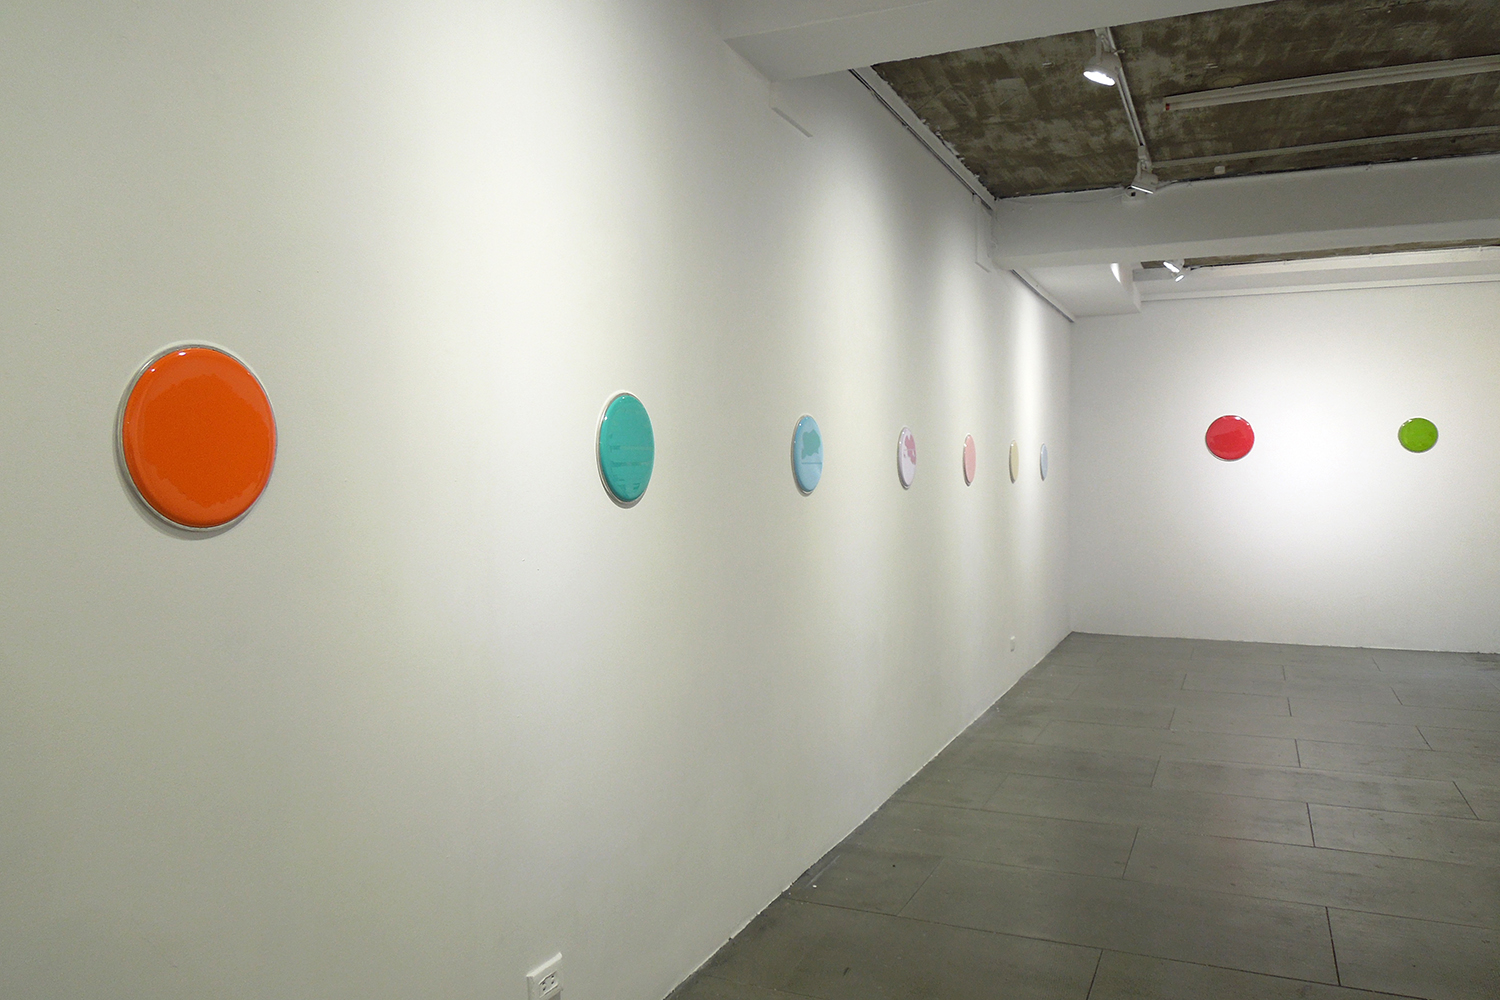 Installation View: Acrylic on resin series<br>267 mm diameter｜2018 each